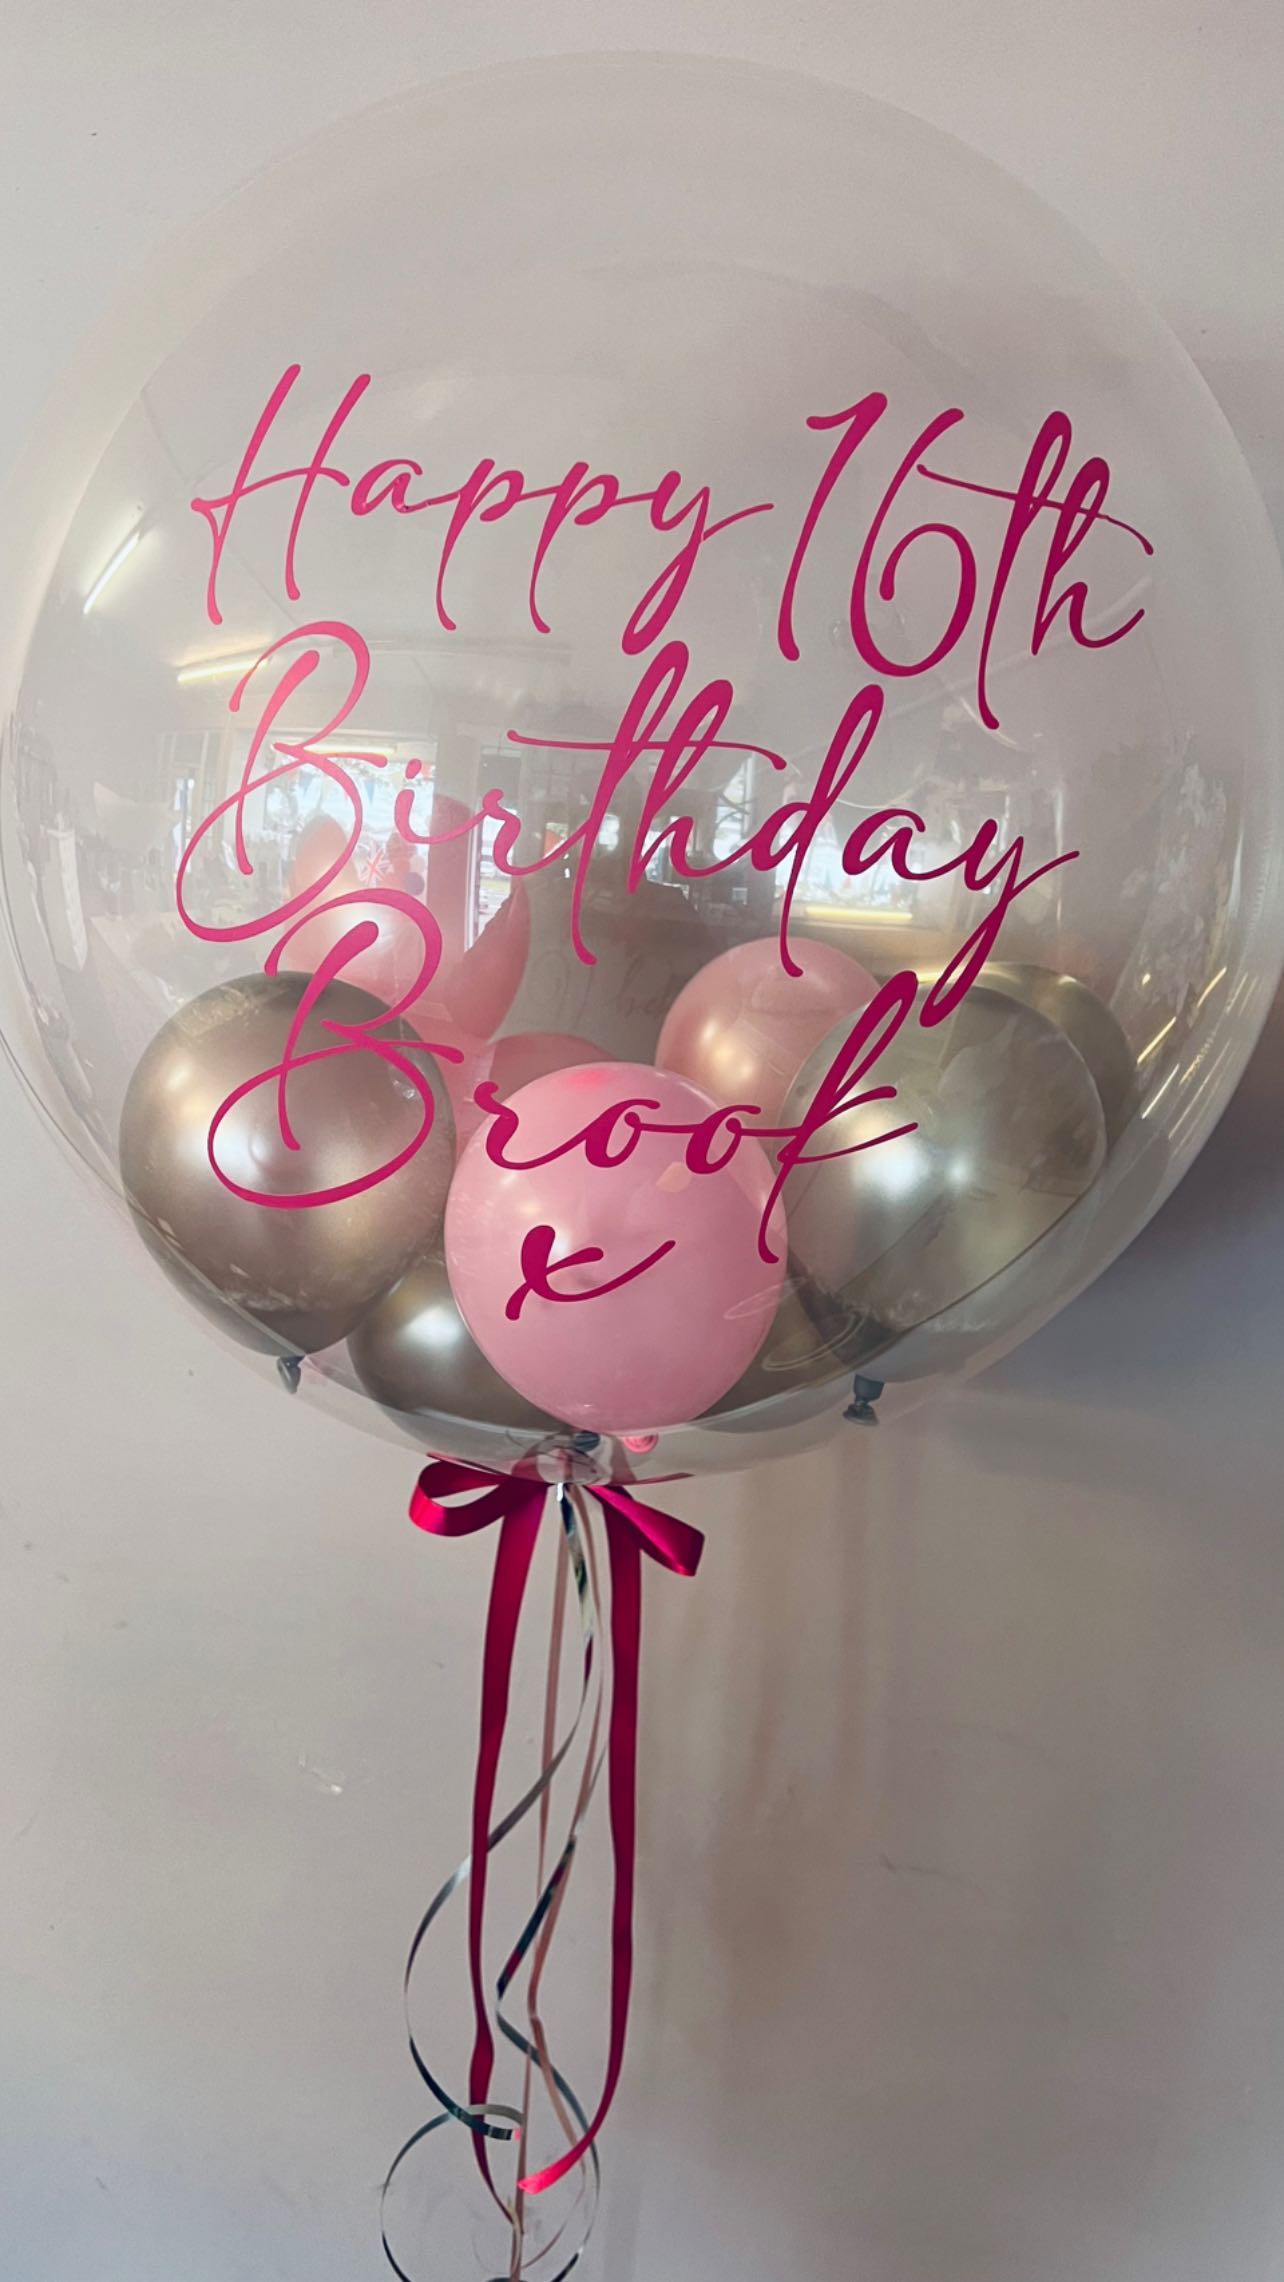 Balloons & Gifts